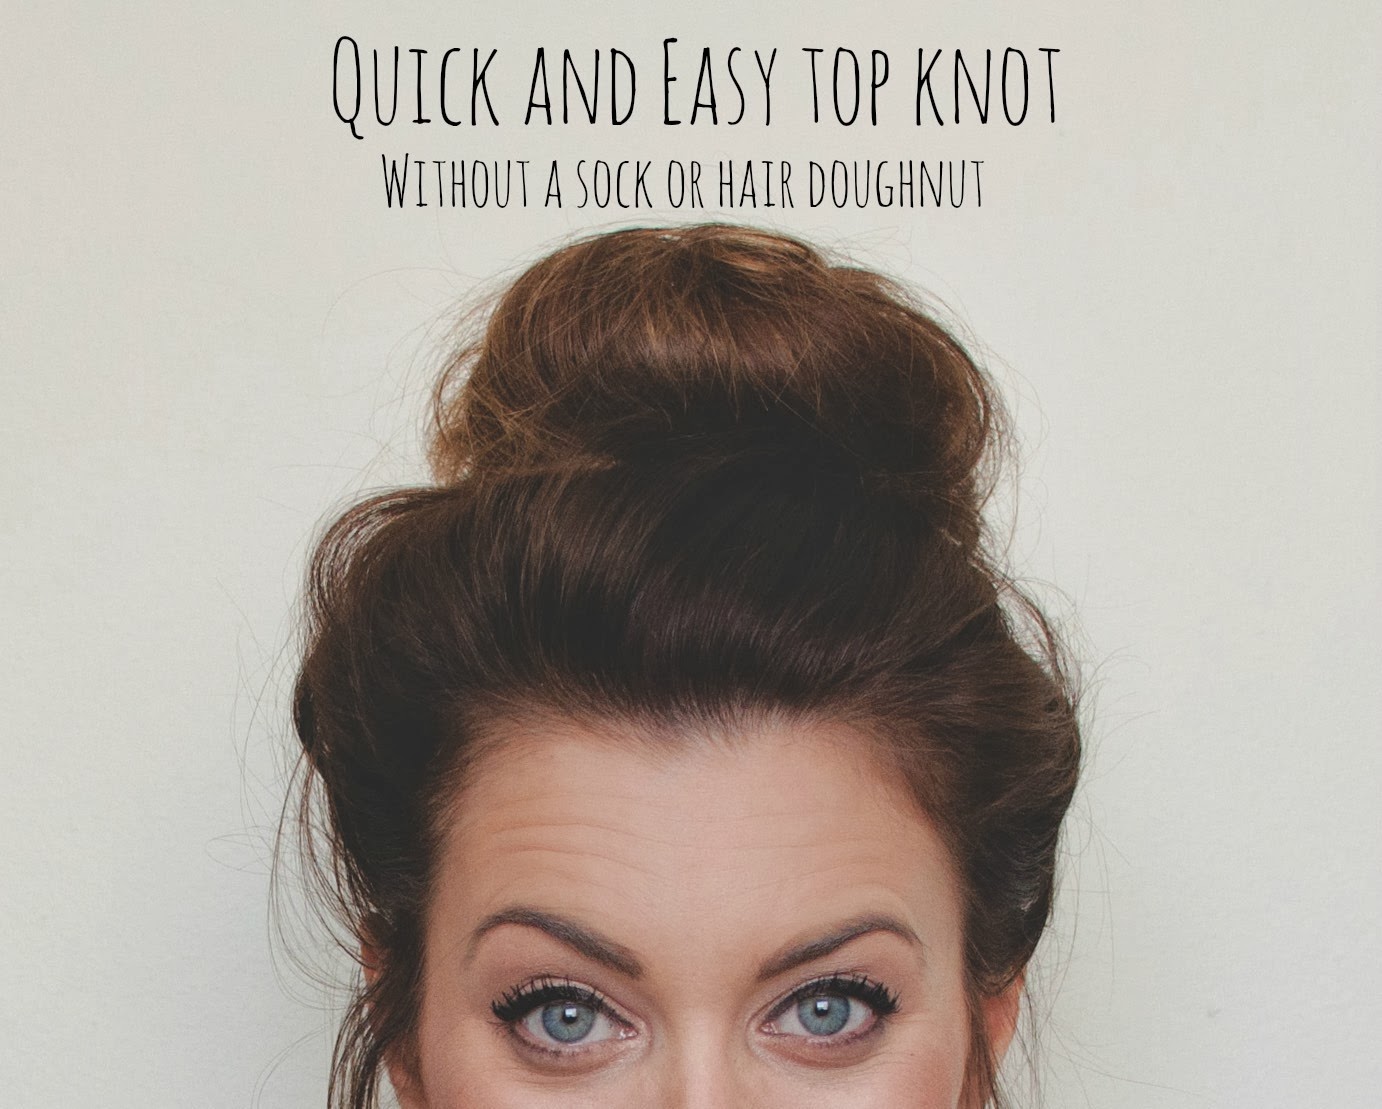 Quick and Easy Top Knot - No Sock or Doughnut Required | La Petite Noob | A Toronto-Based Fashion Lifestyle